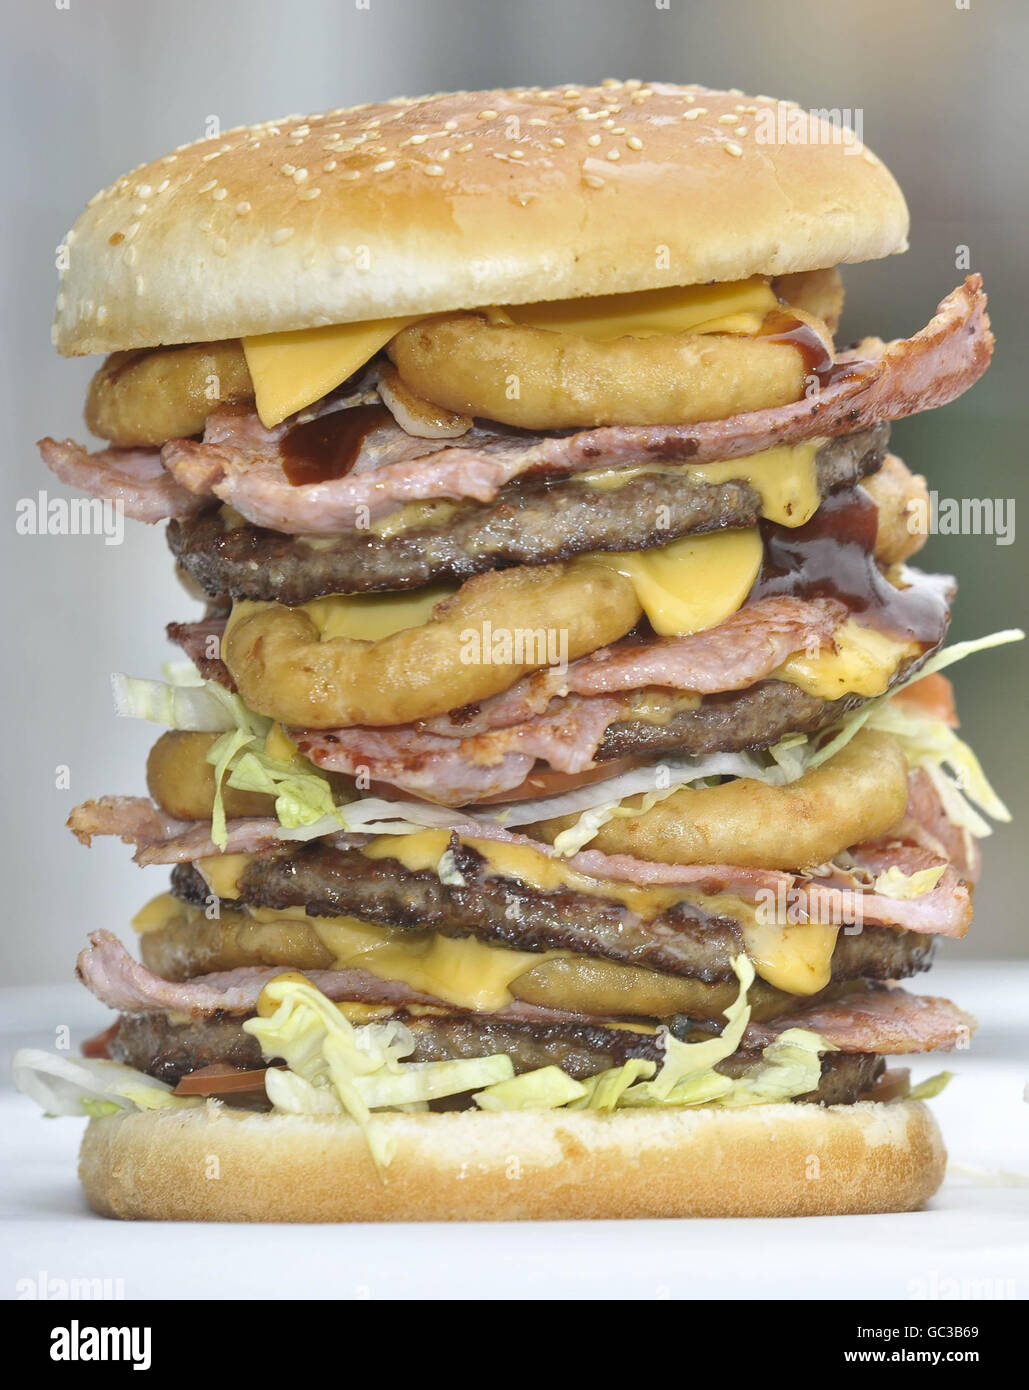 The 'Super Scooby' burger, Britain's largest and most fattening burger with an artery-busting 2,645 calories. Stock Photo